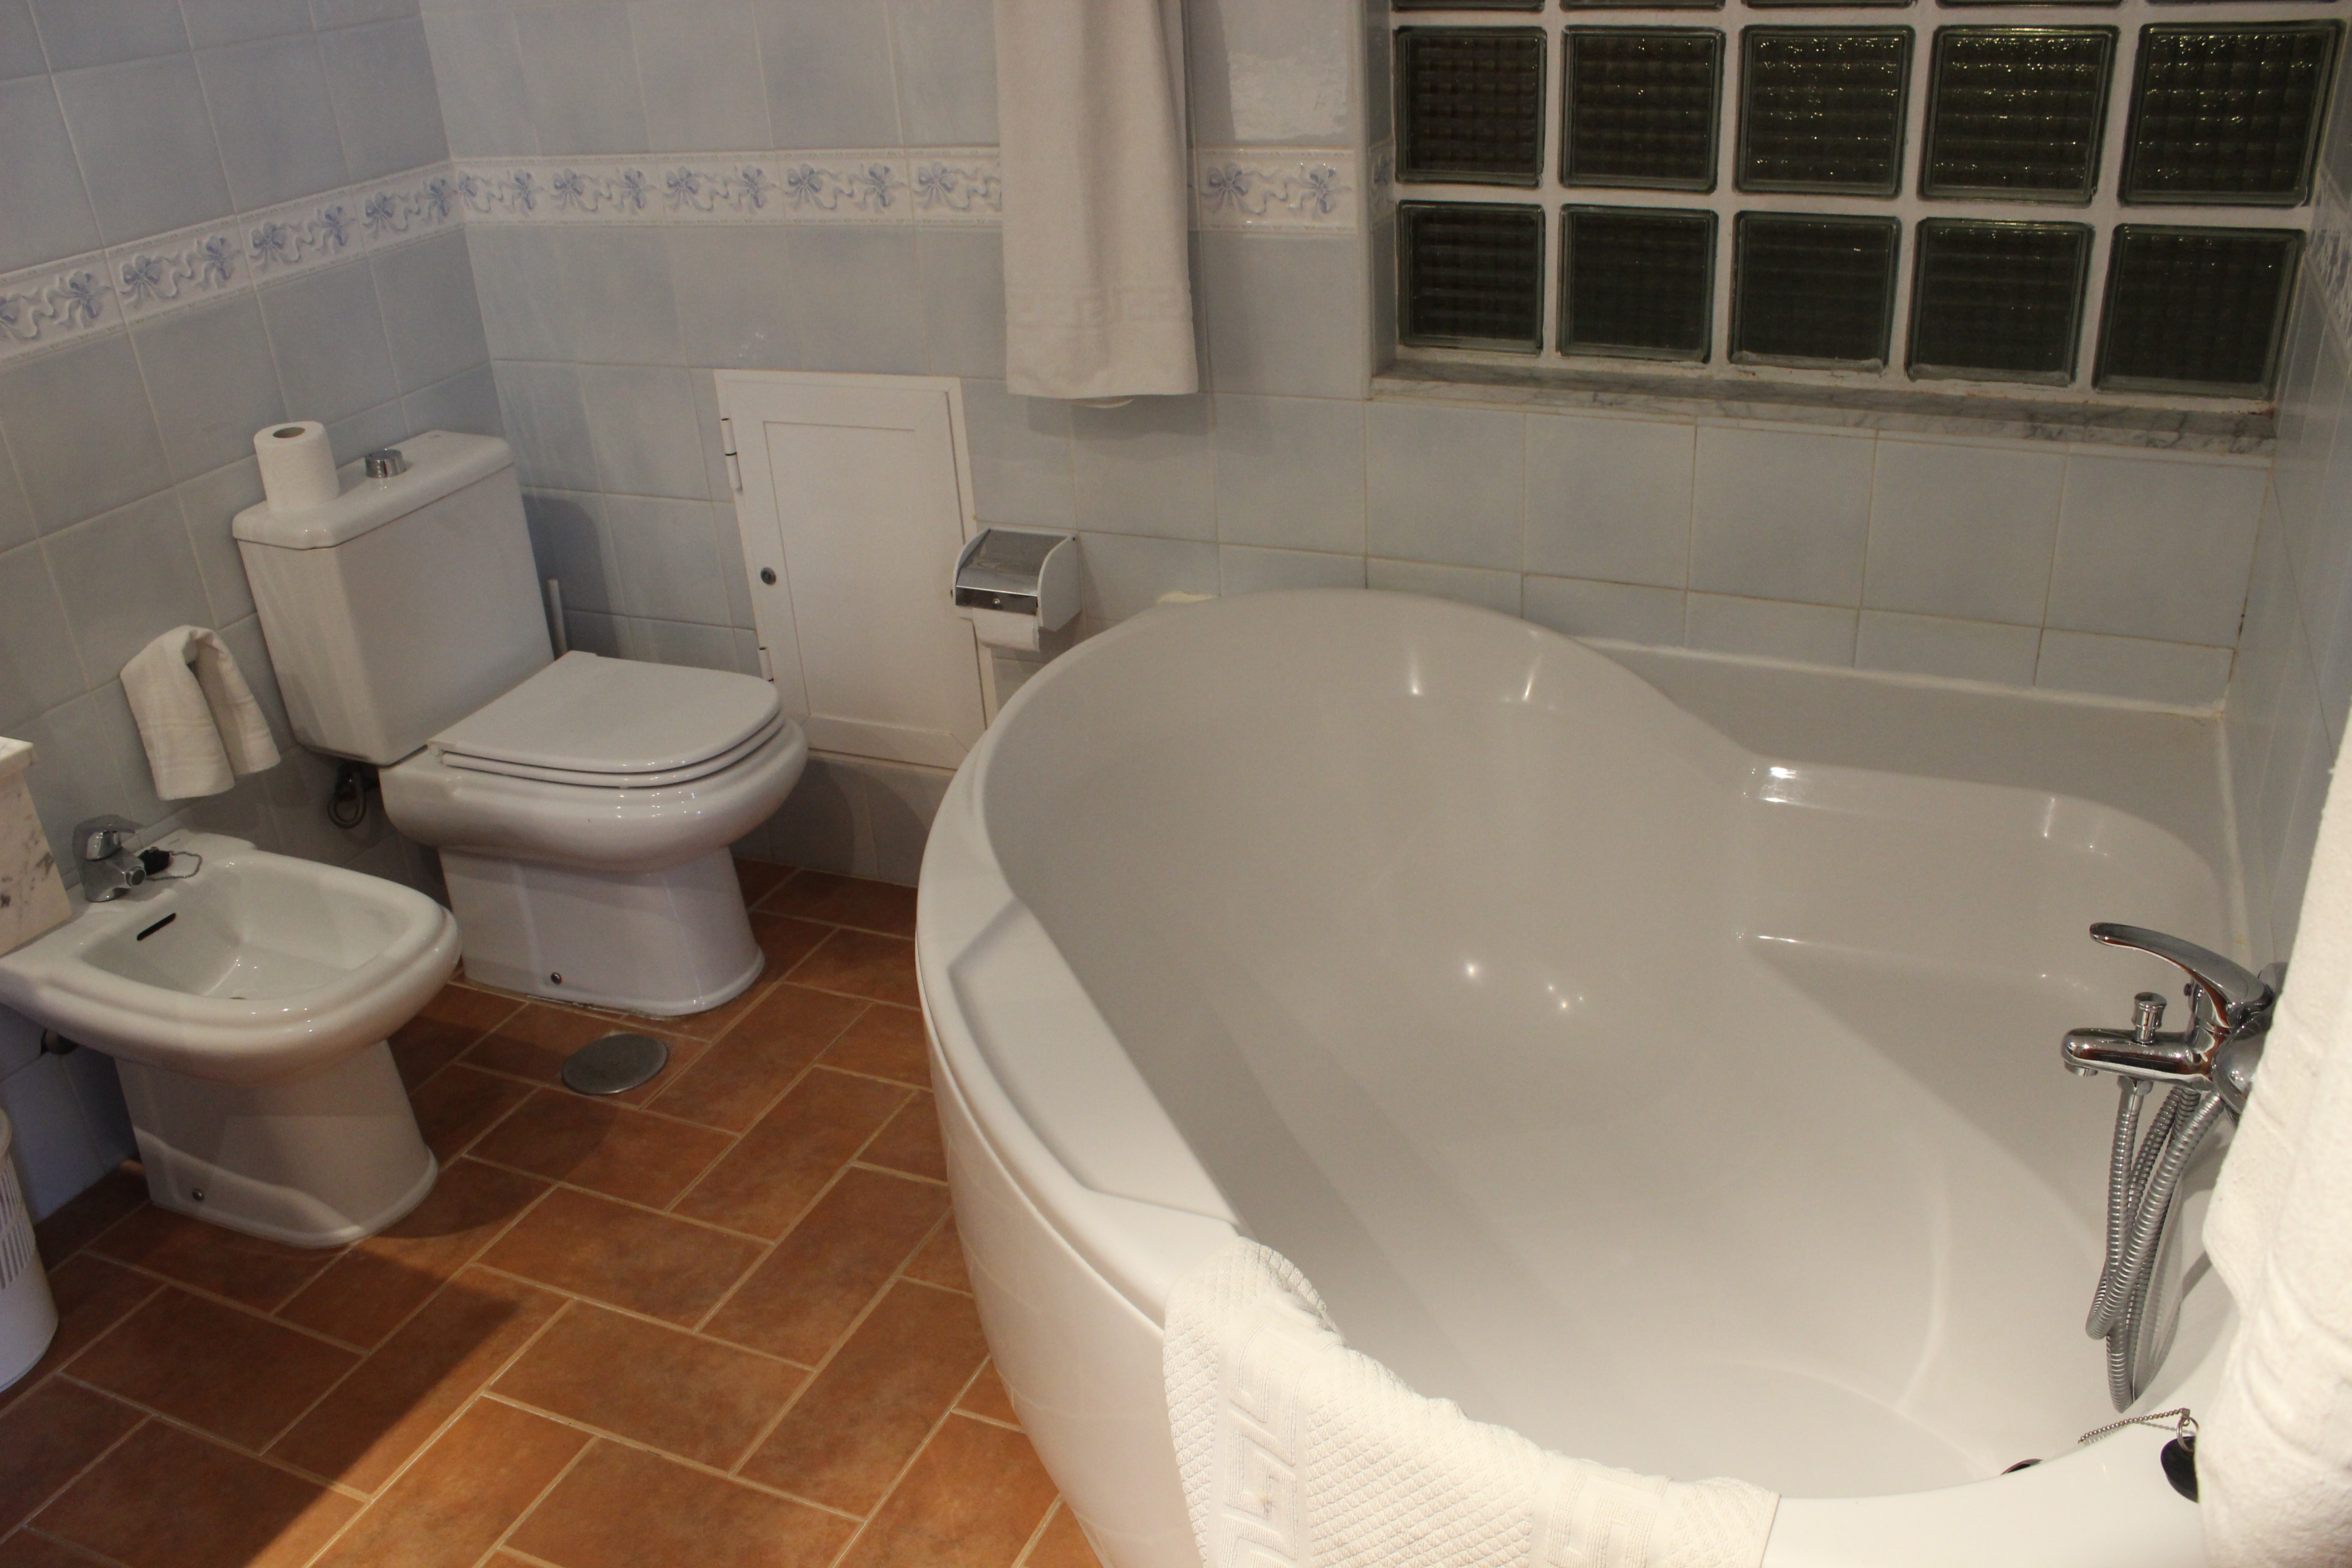 view of the Bathtub in the bathroom of the room.